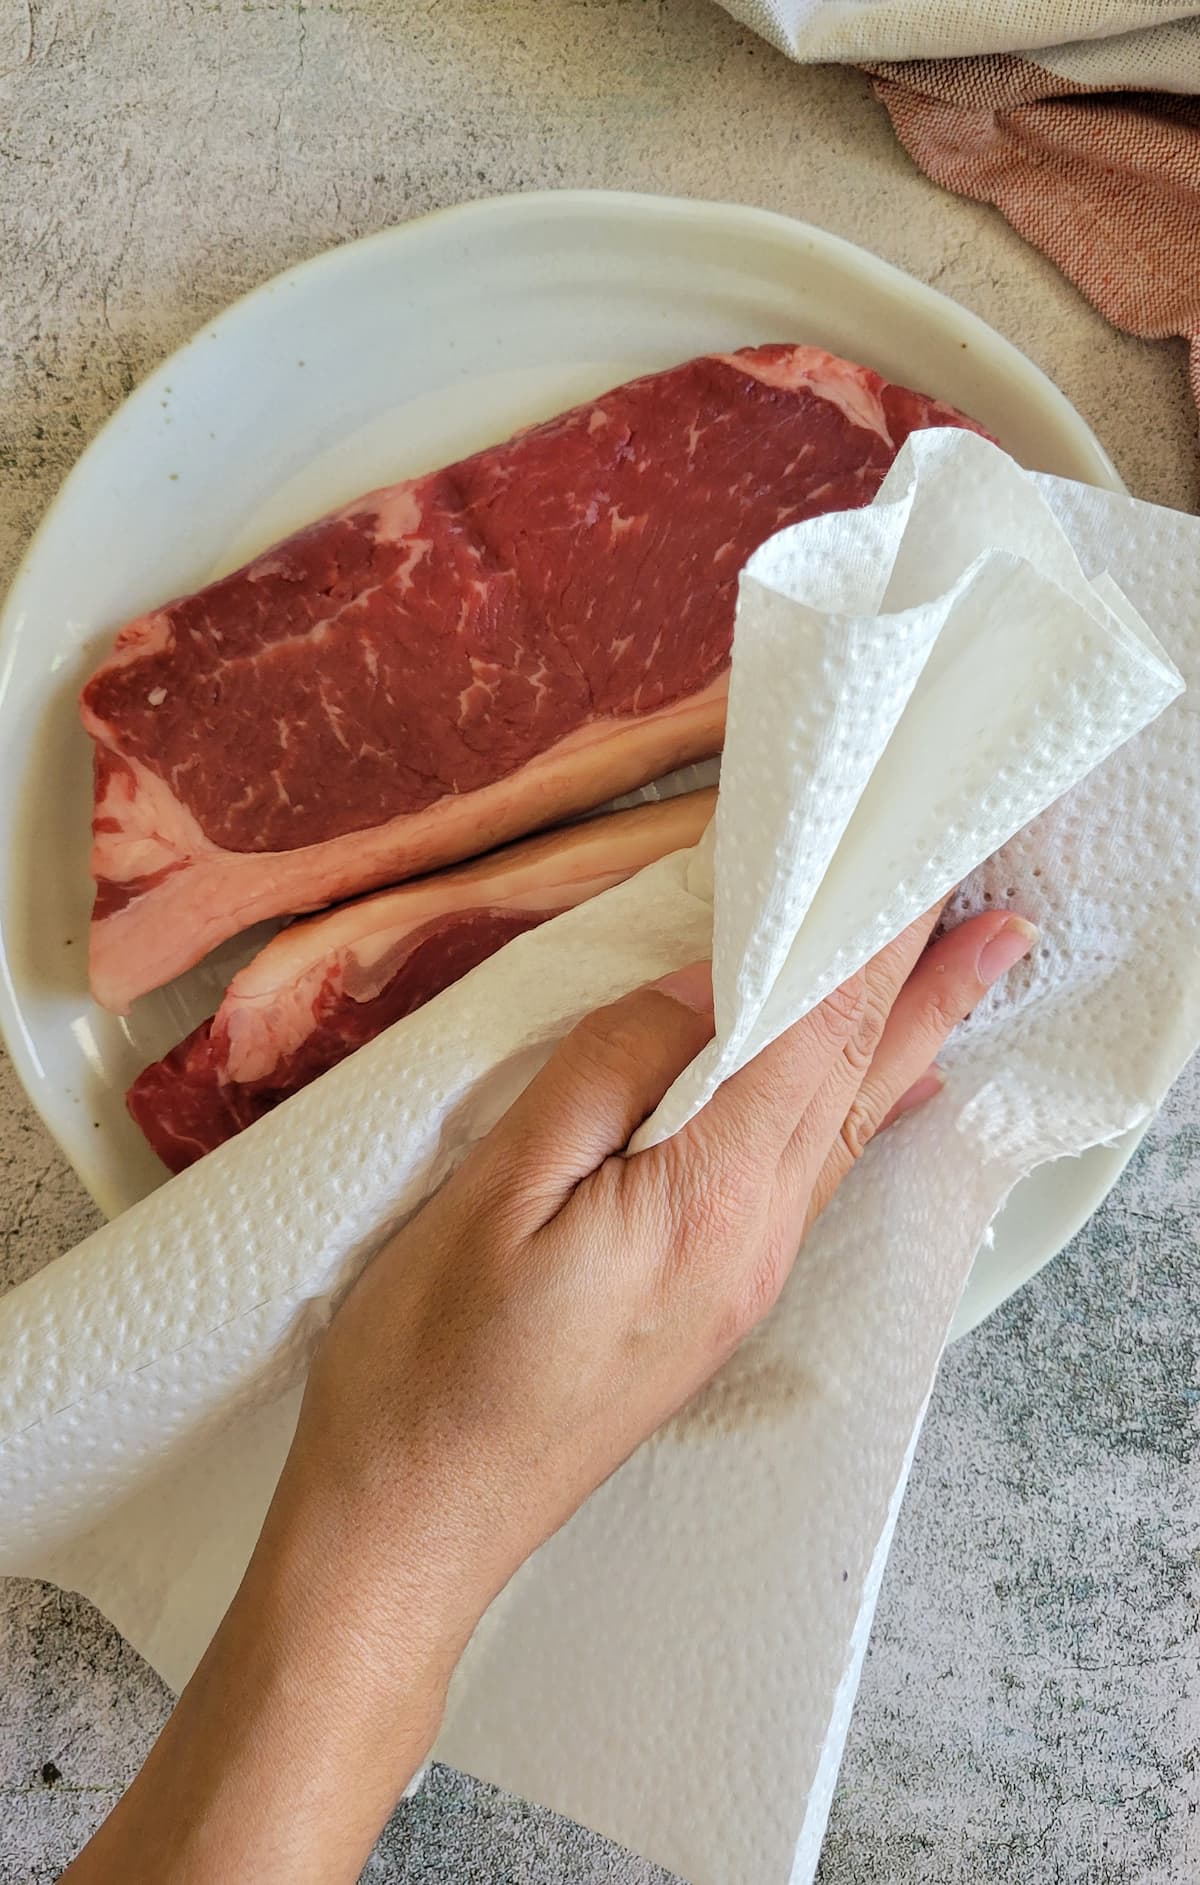 hand with a paper towel patting down two raw steaks on a plate